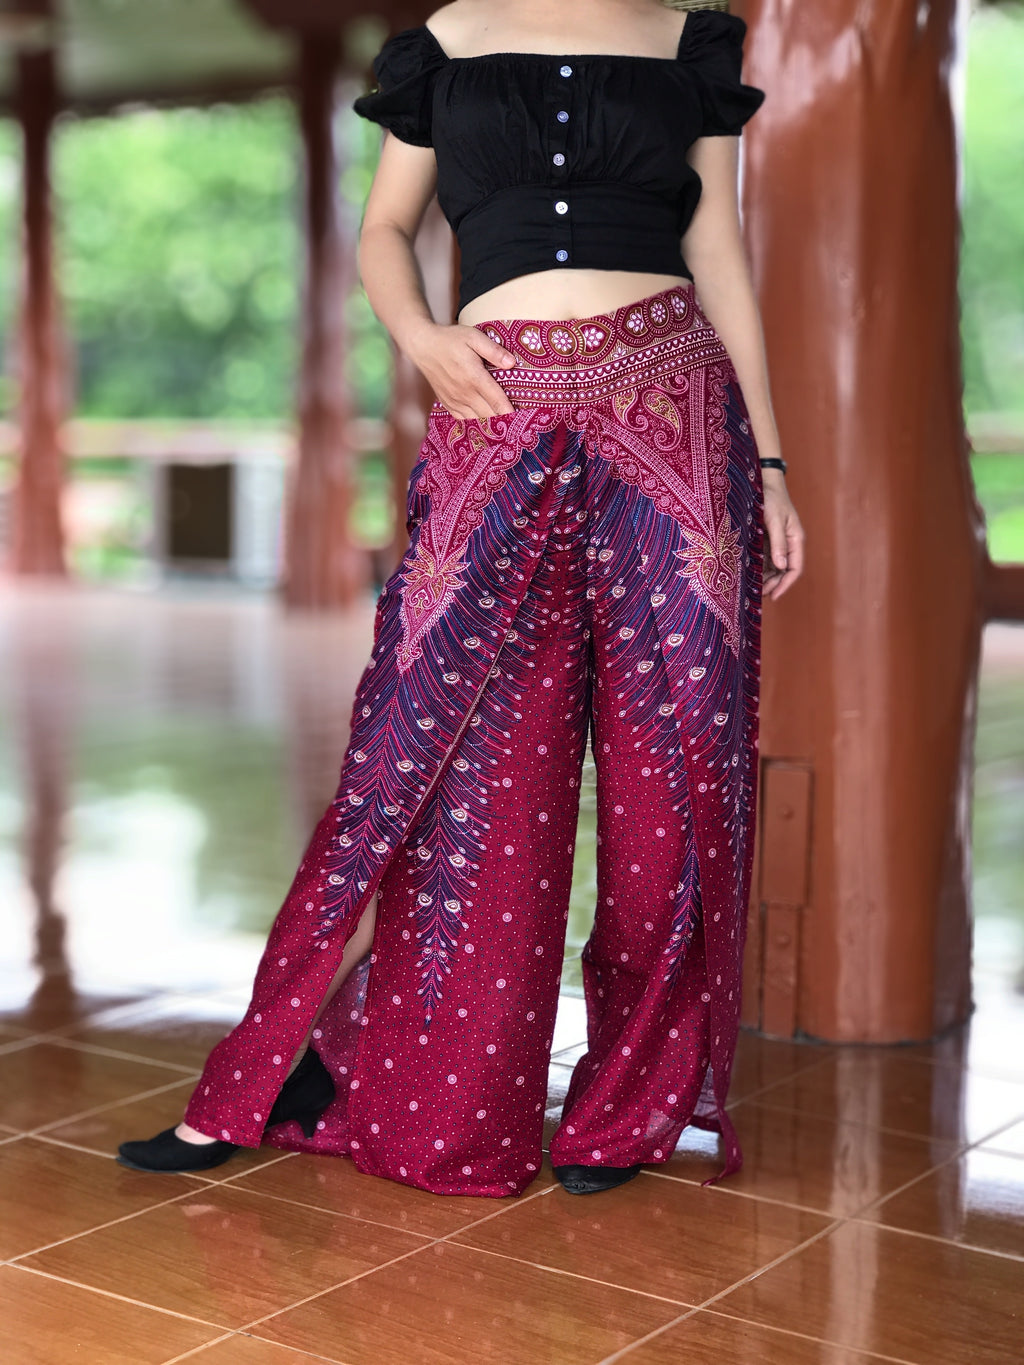 PEACOCK PALAZZO PANTS Women Red Small to Large Plus Sizes Hippie Style  Clothes Wide Leg Pants Boho Pants Summer Thai Yoga Pants -  Finland